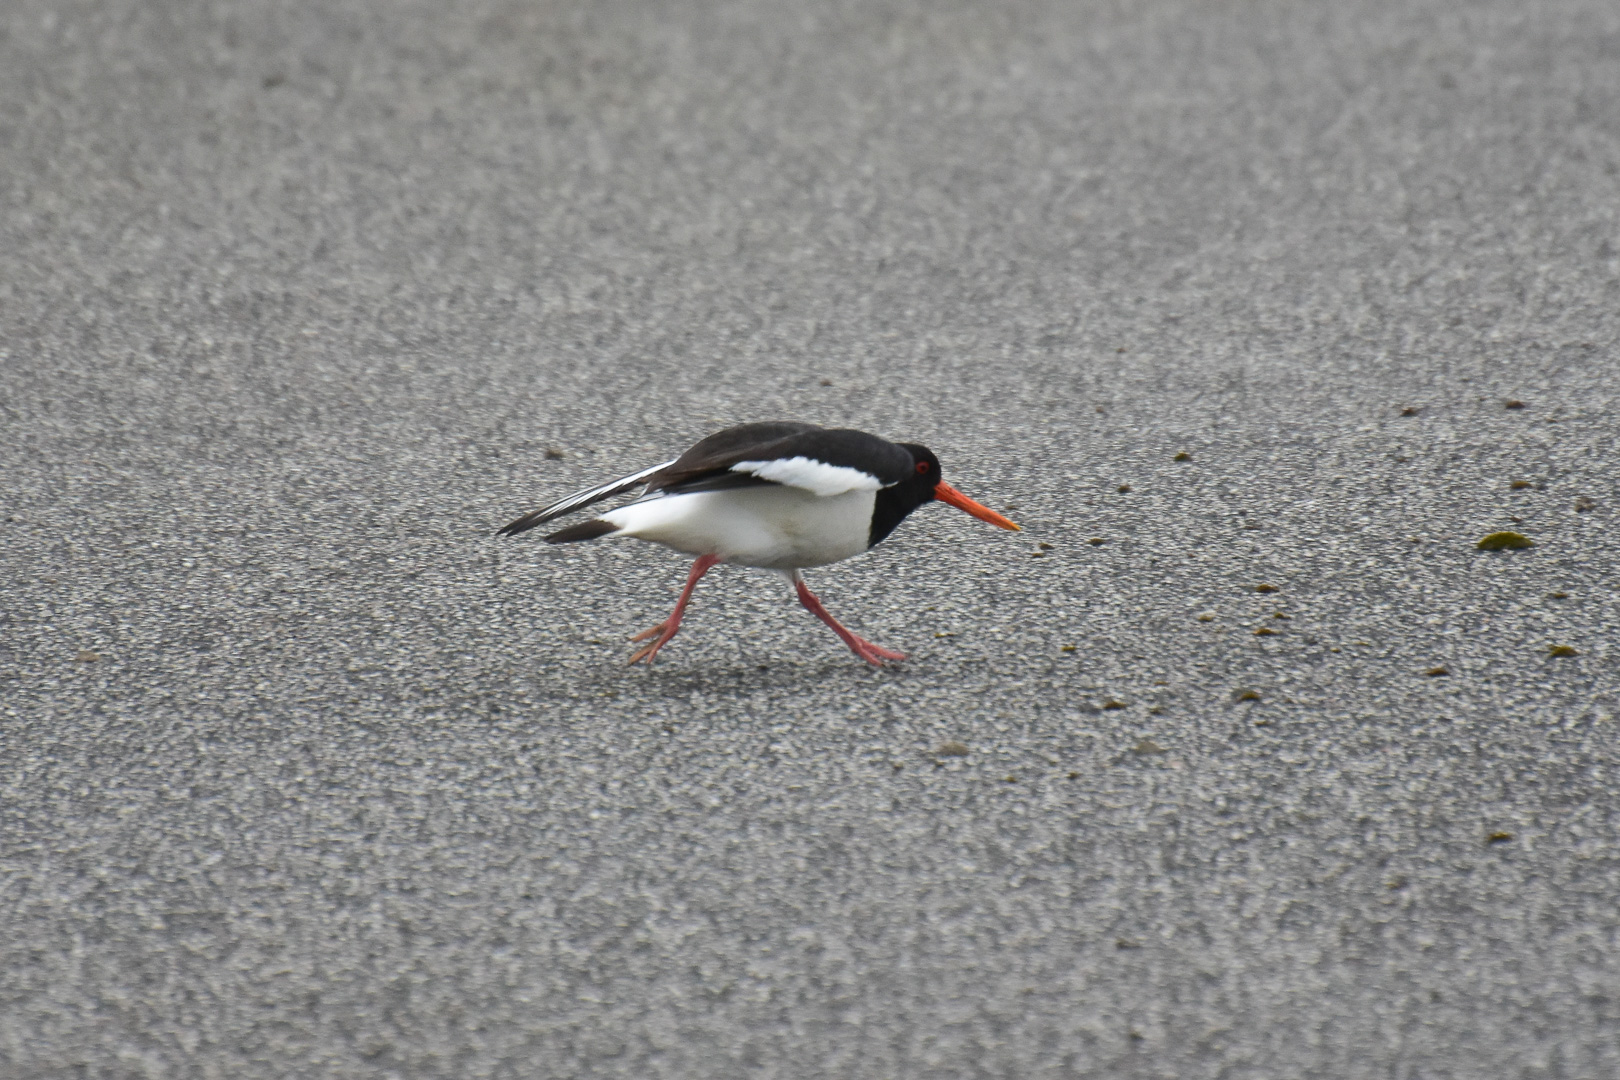 More of the Oystercatchers